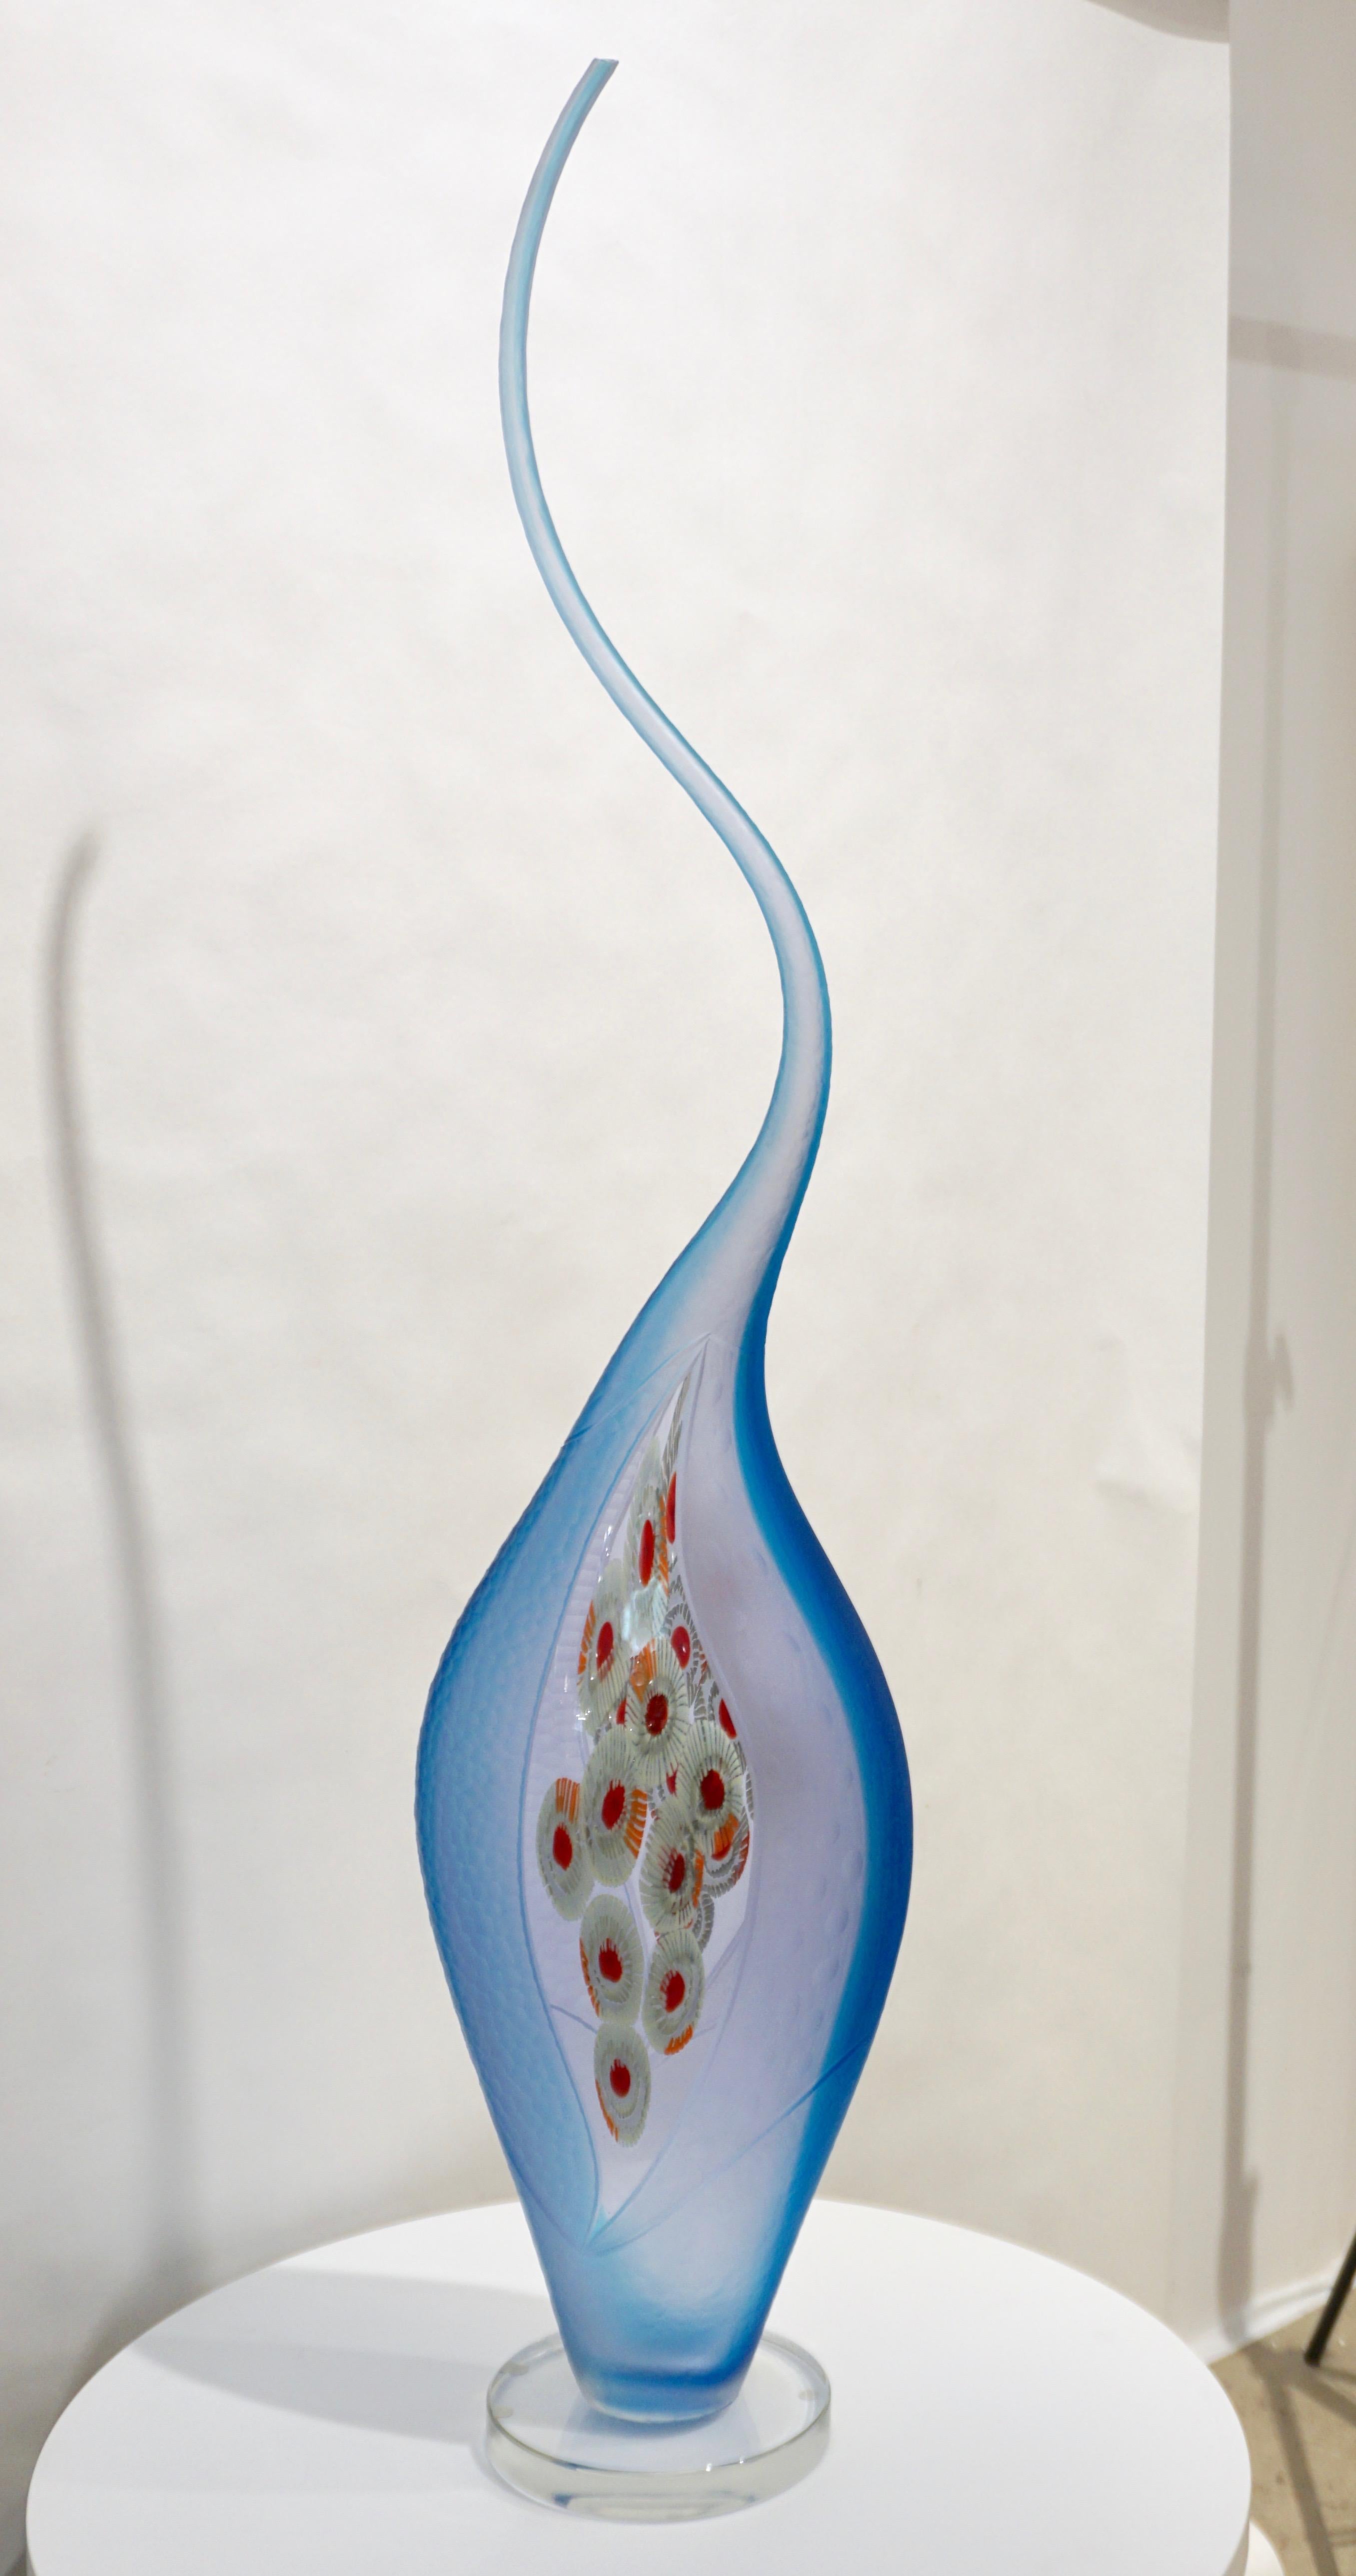 Monumental Italian Art Glass vase, one of a kind Work of Art by Alberto Donà, in blown Murano glass. The crystal overlaying body tinted with Alexandrite has violet purple and blue reflections, skillfully embraced by a turquoise aquamarine border and